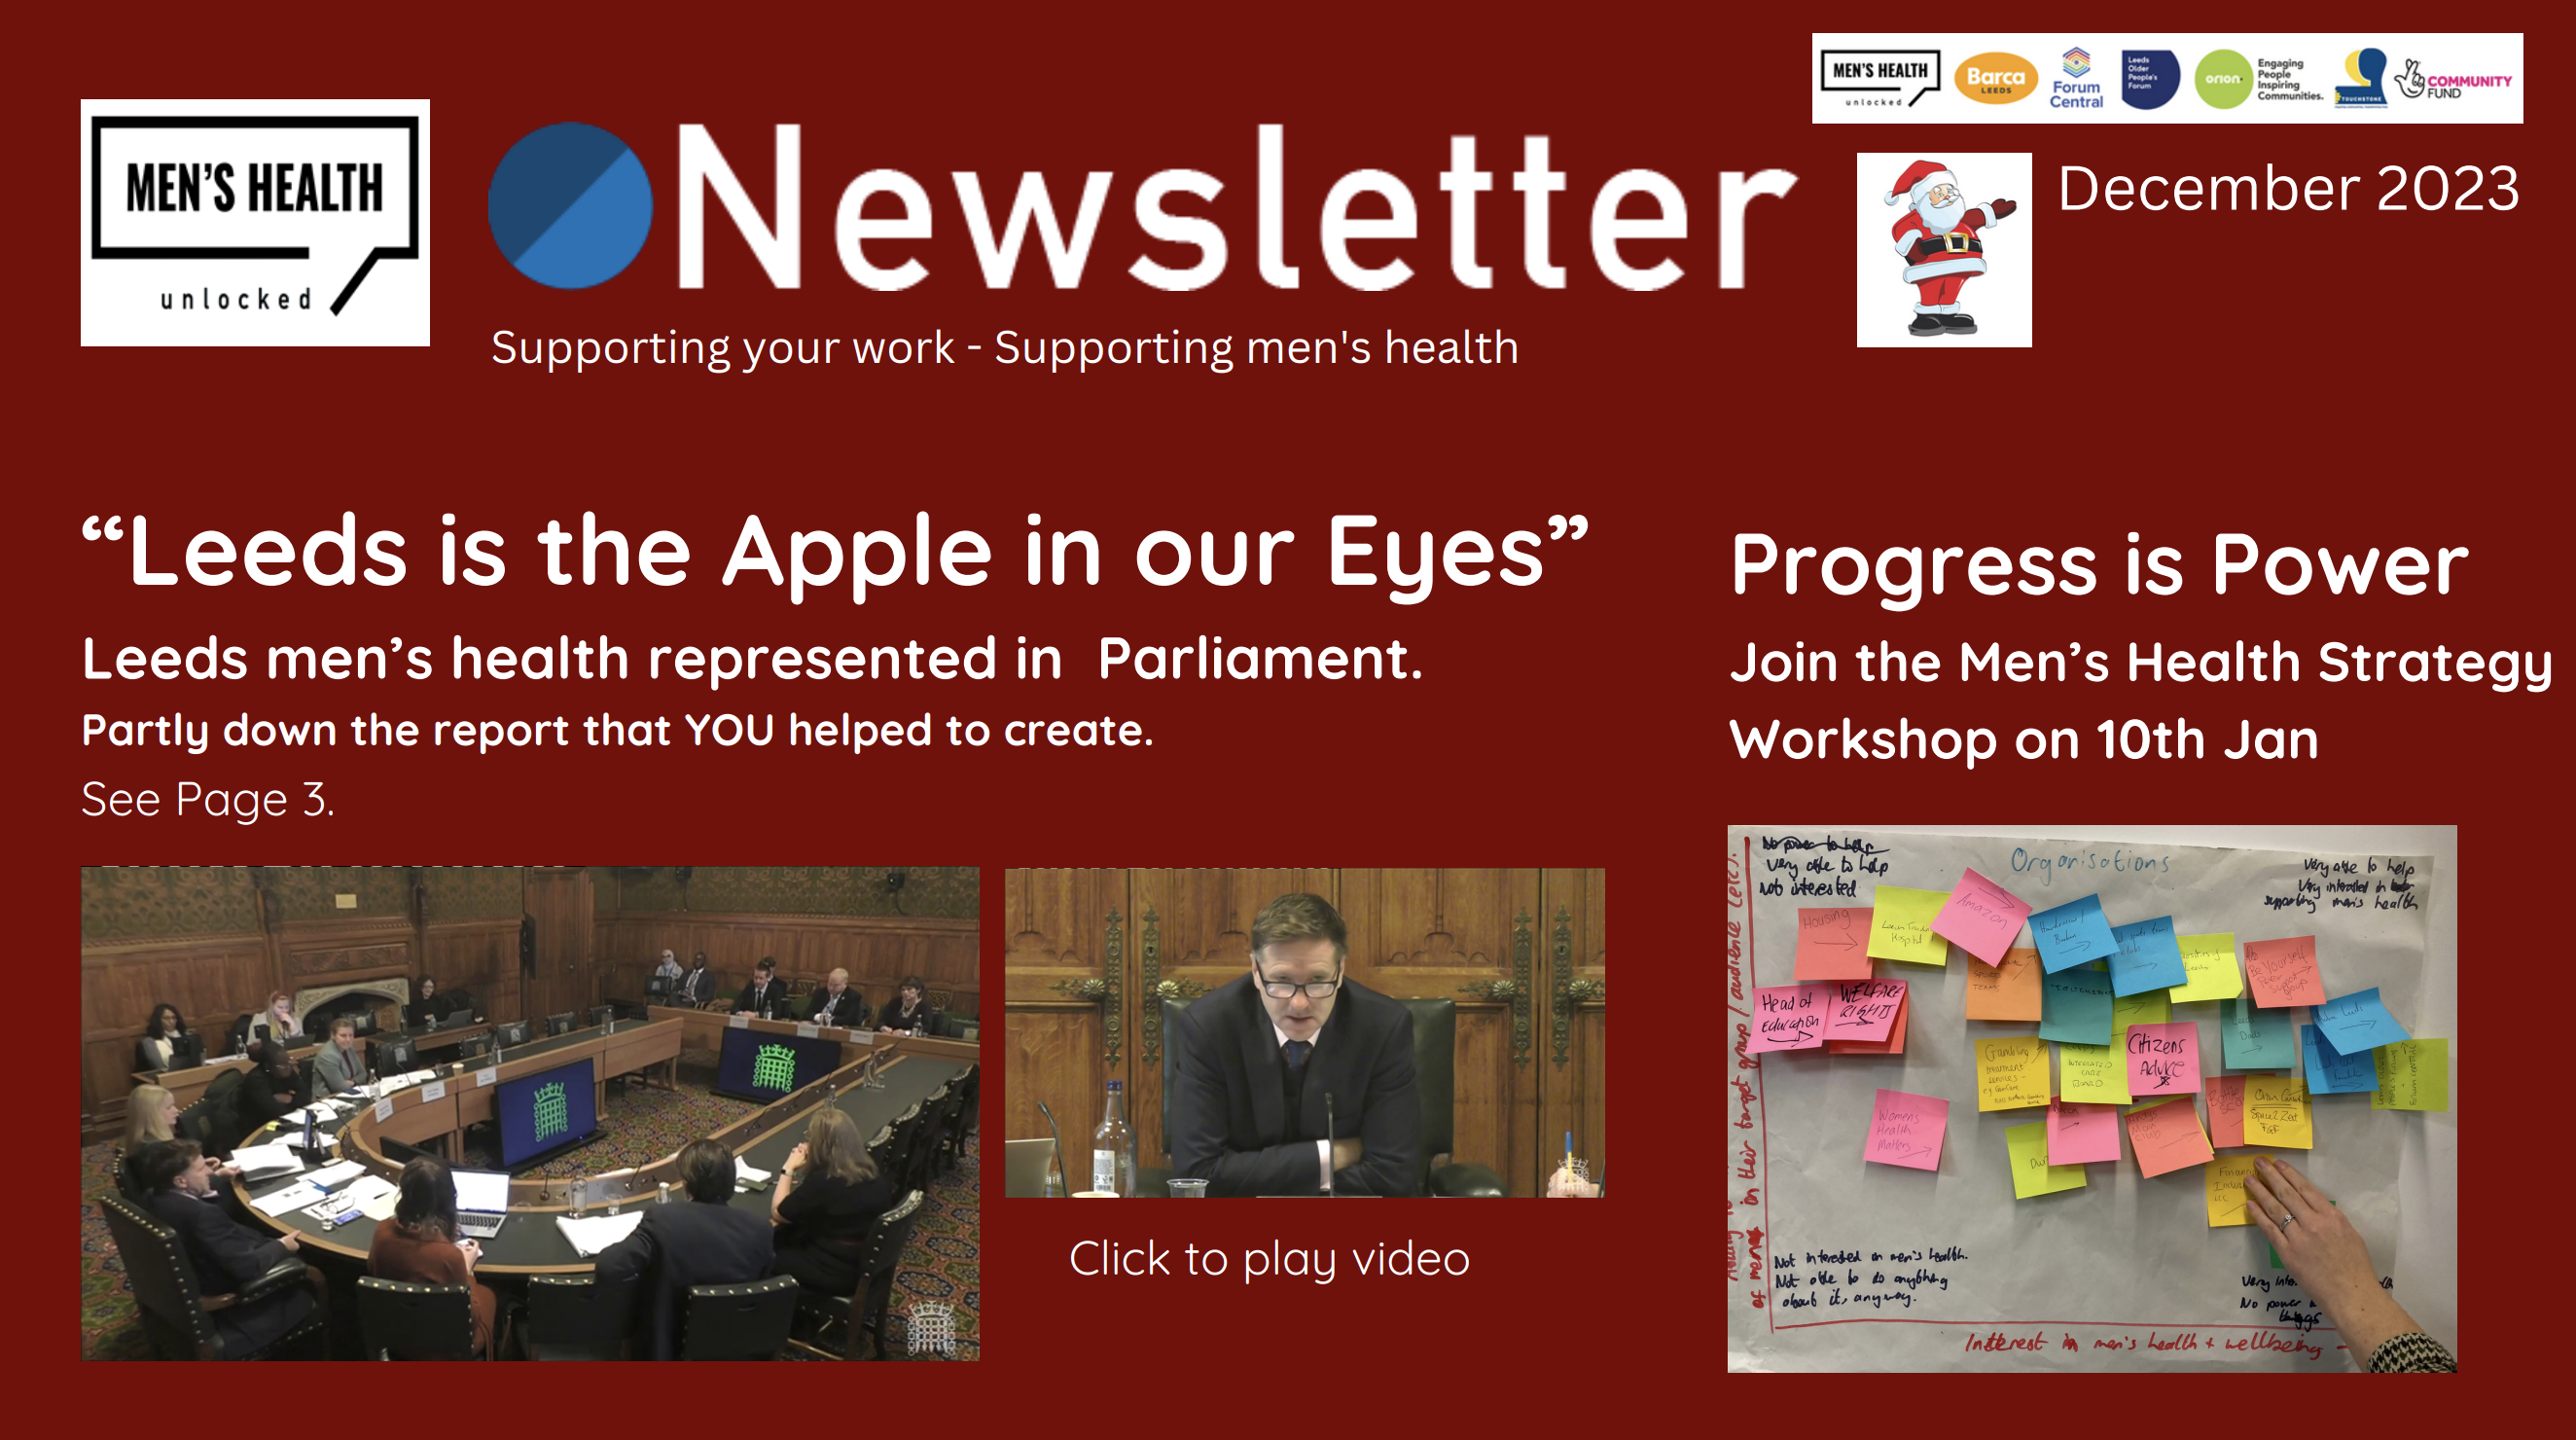 Image is of the MHU Newsletter. There are images of the Men's Health Parliamentary Inquiry. ABove these images is a quote which says "Leeds is the apple in our eyes." To the right is an image of a piece of flipchart paper with sticky notes on it. Above it reads "Progress is power. Join the Men's Health Strategy Workshop on 10 January."